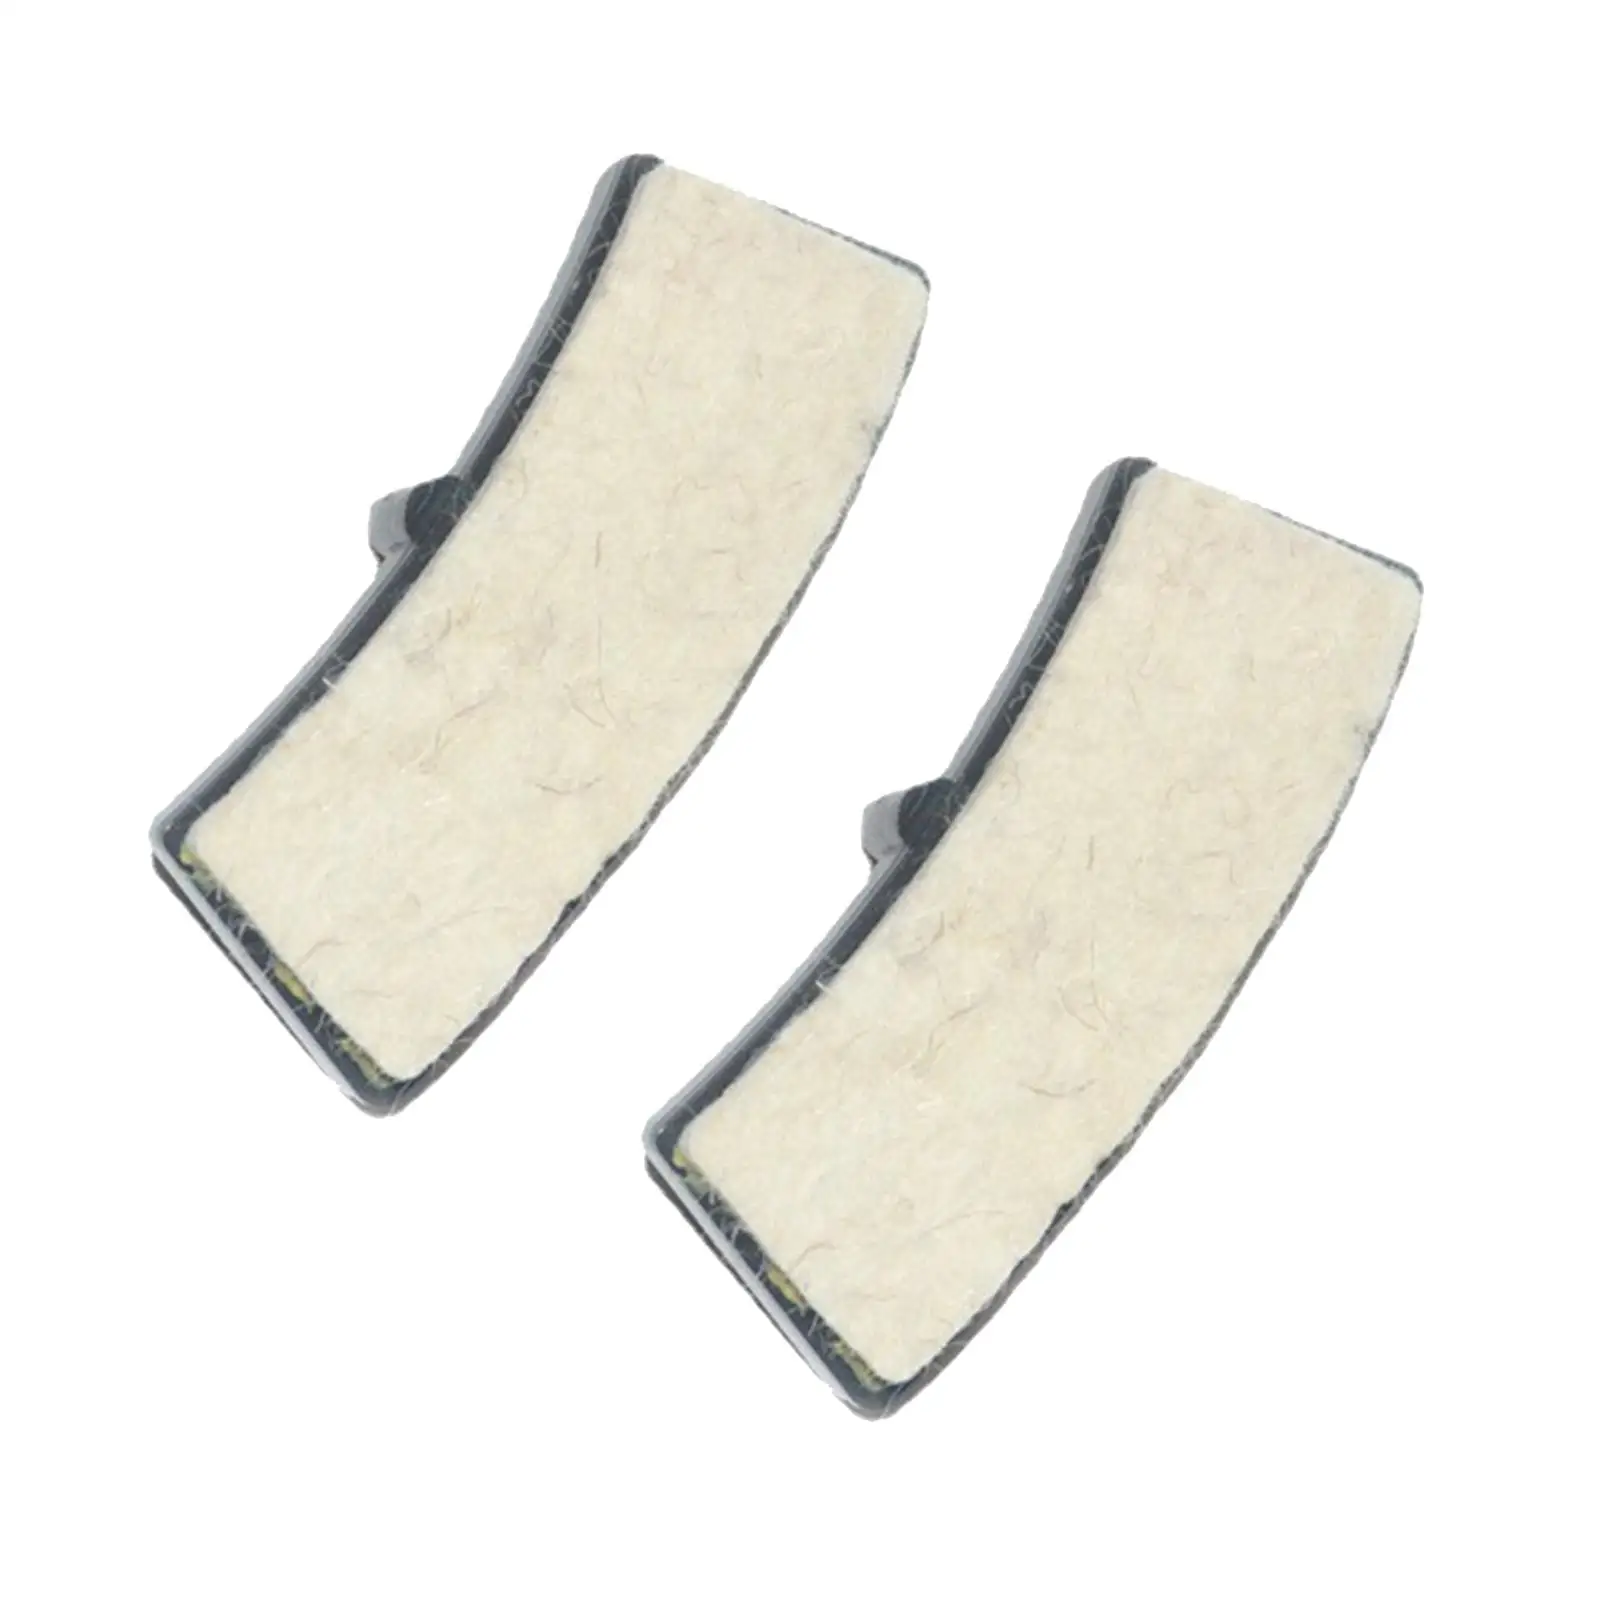 Brake Pad Replaces Accessory Friction Cotton Caliper Ground Felt Professional